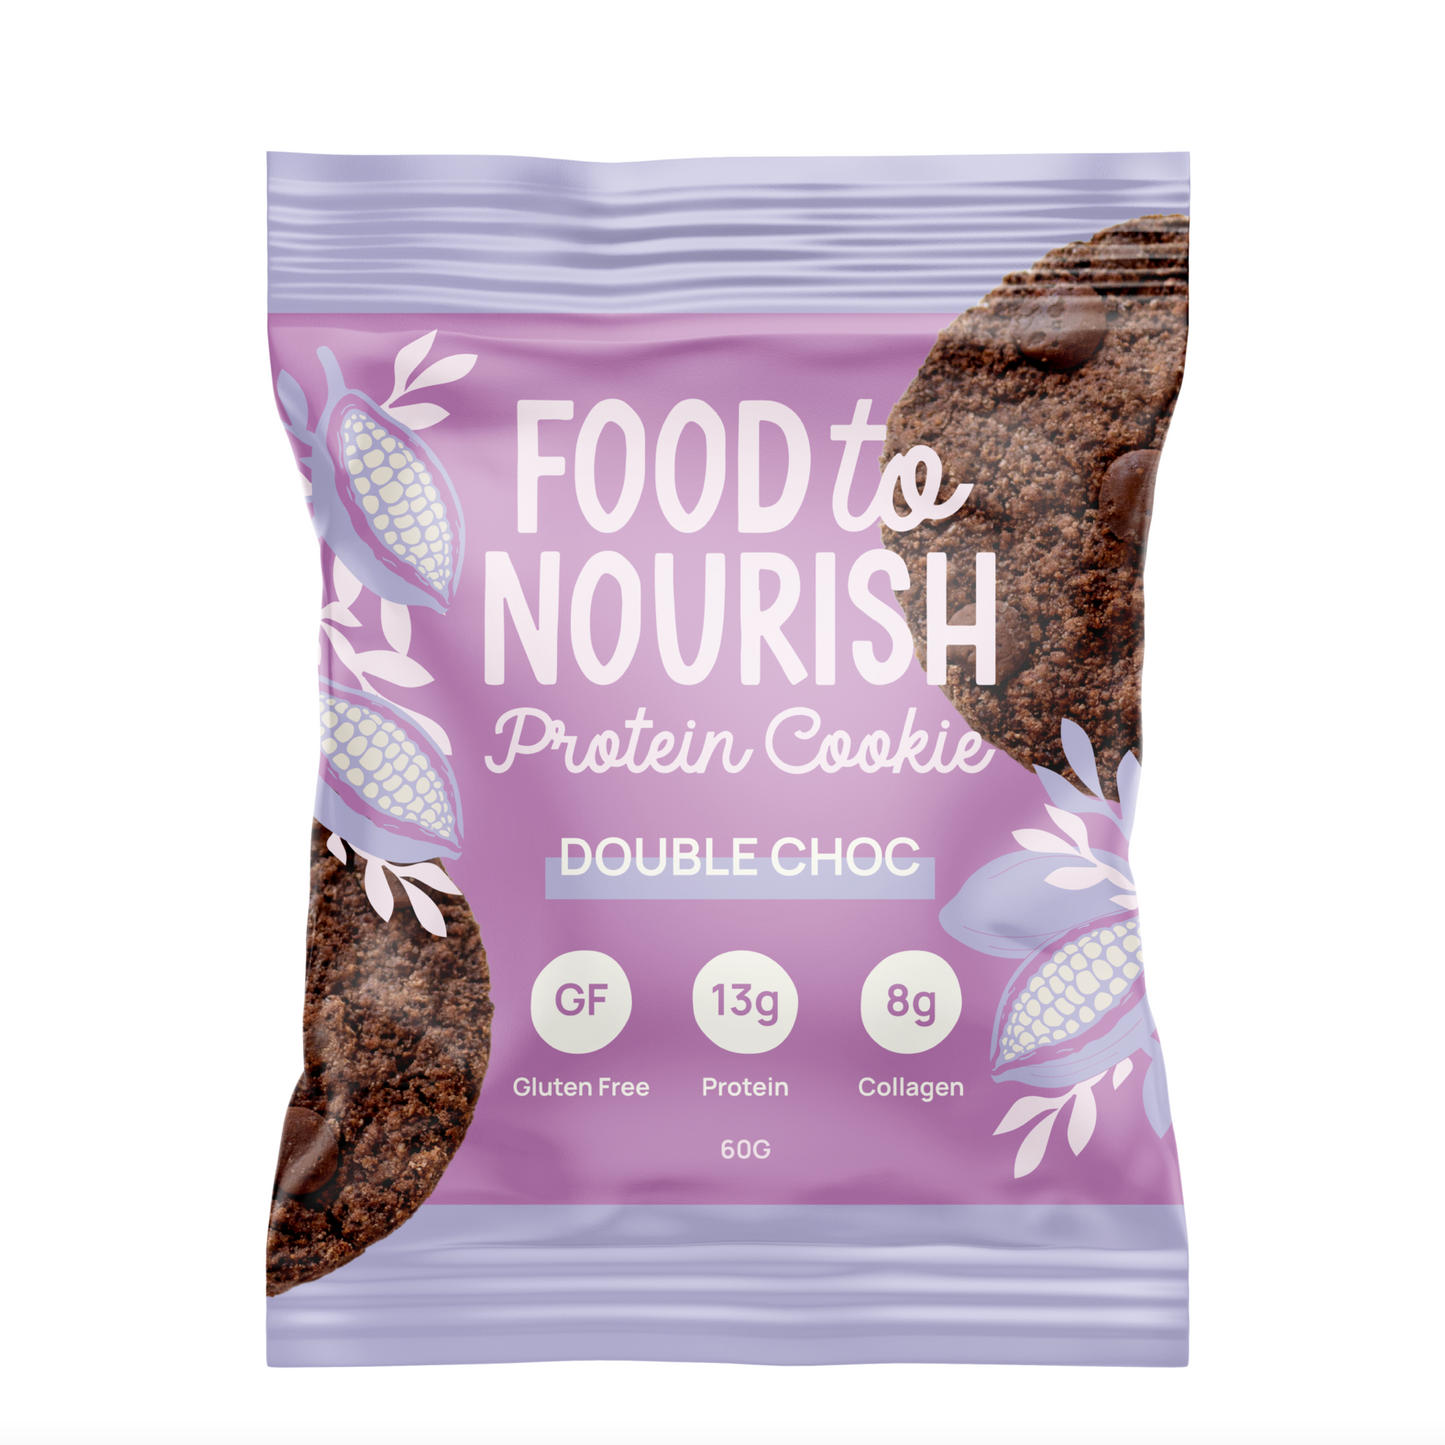 Food To Nourish Protein Cookie 60g Or Box of 12, Double Choc